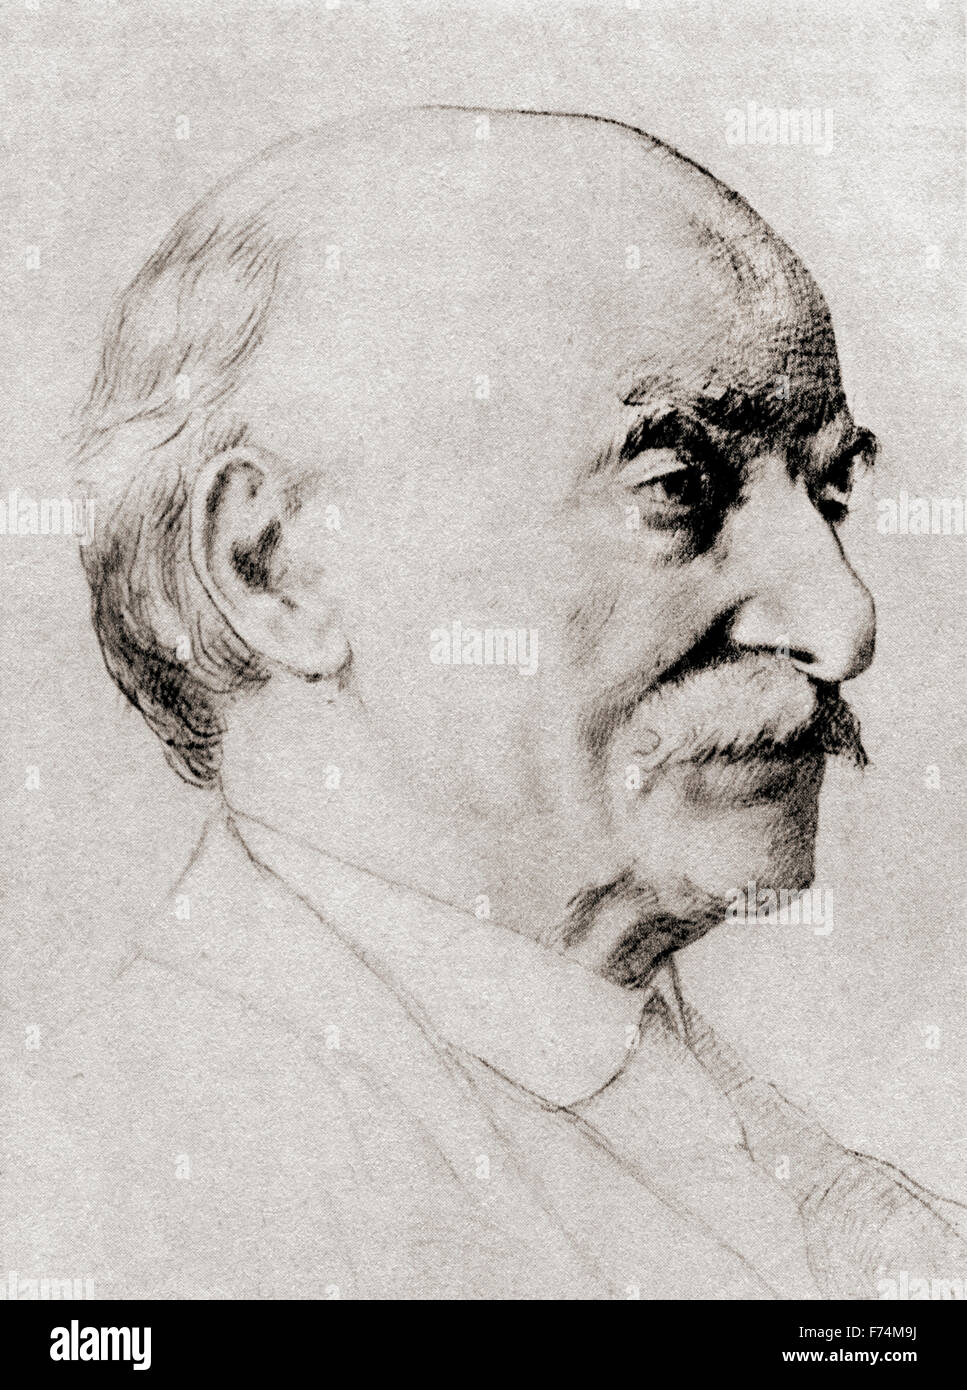 Thomas Hardy, 1840 – 1928.  English novelist and poet. After the drawing by William Strang, 1919. Stock Photo